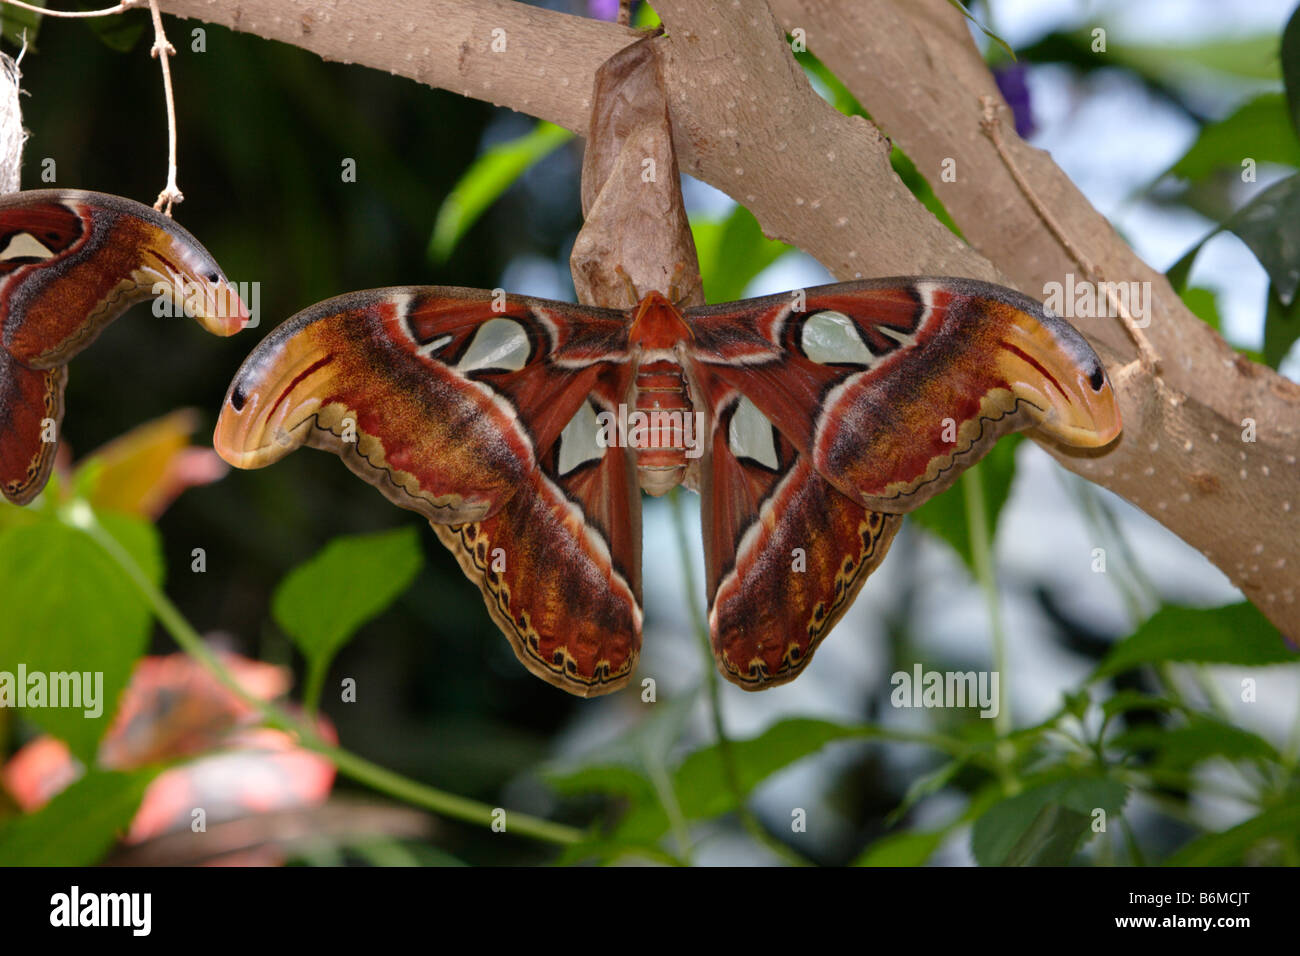 Giant Atlas Moth Attacus atlas on cocoon photographed in captivity Stock Photo